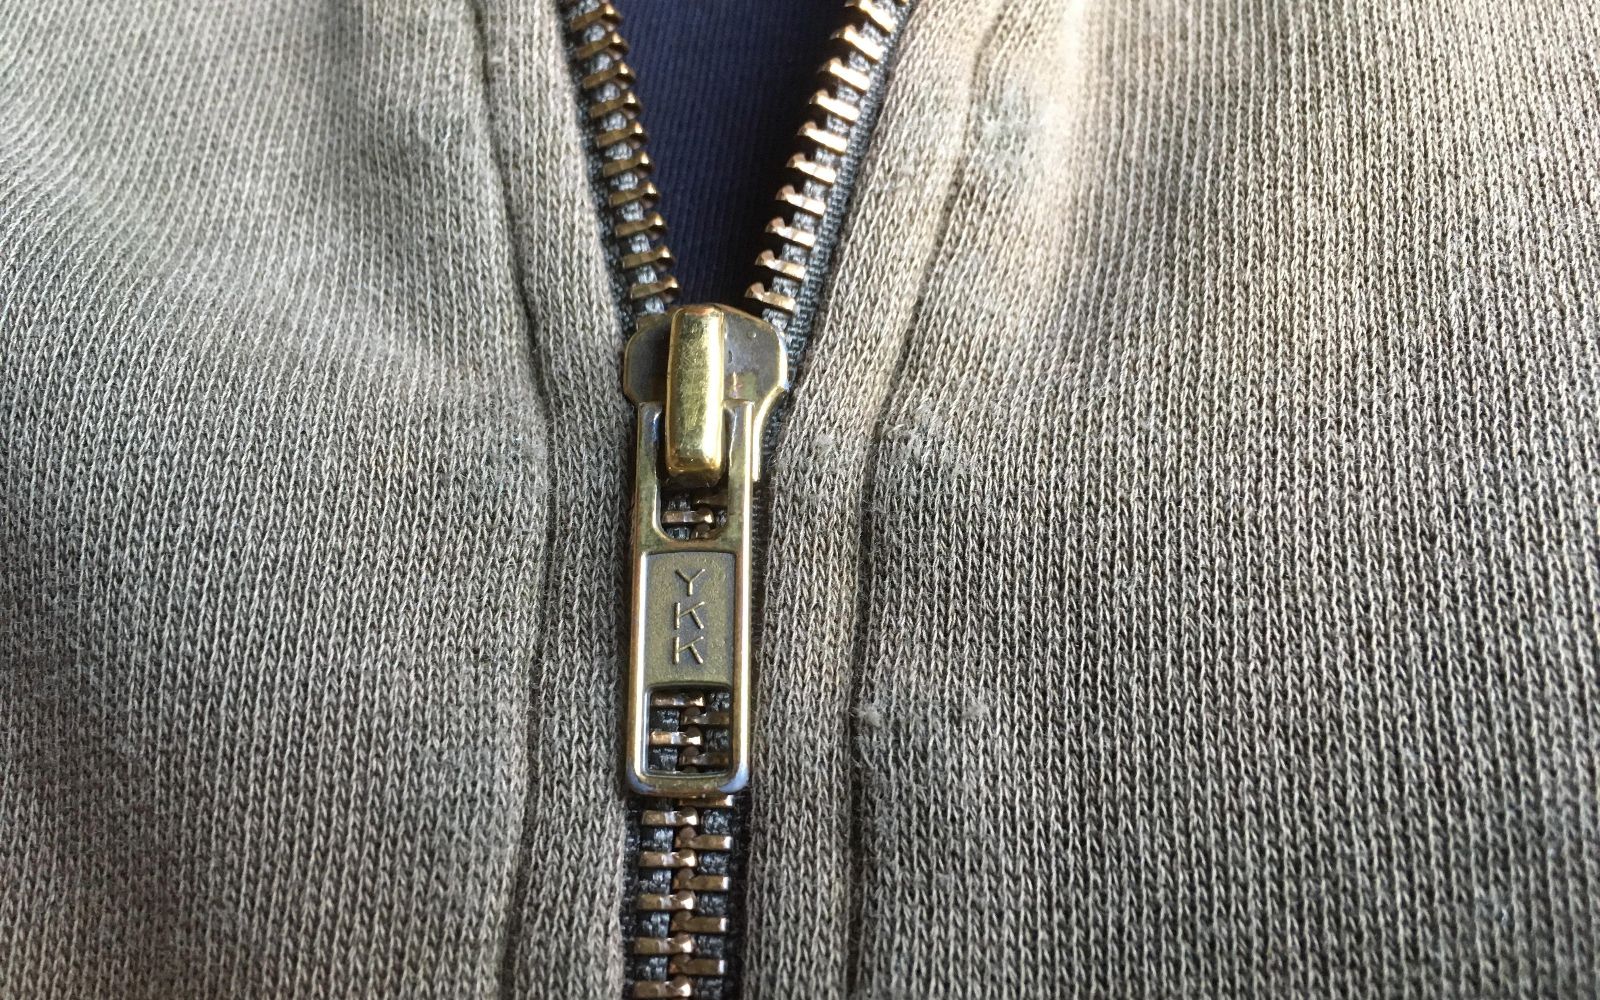 Zippers: toxic chemical substances inside them